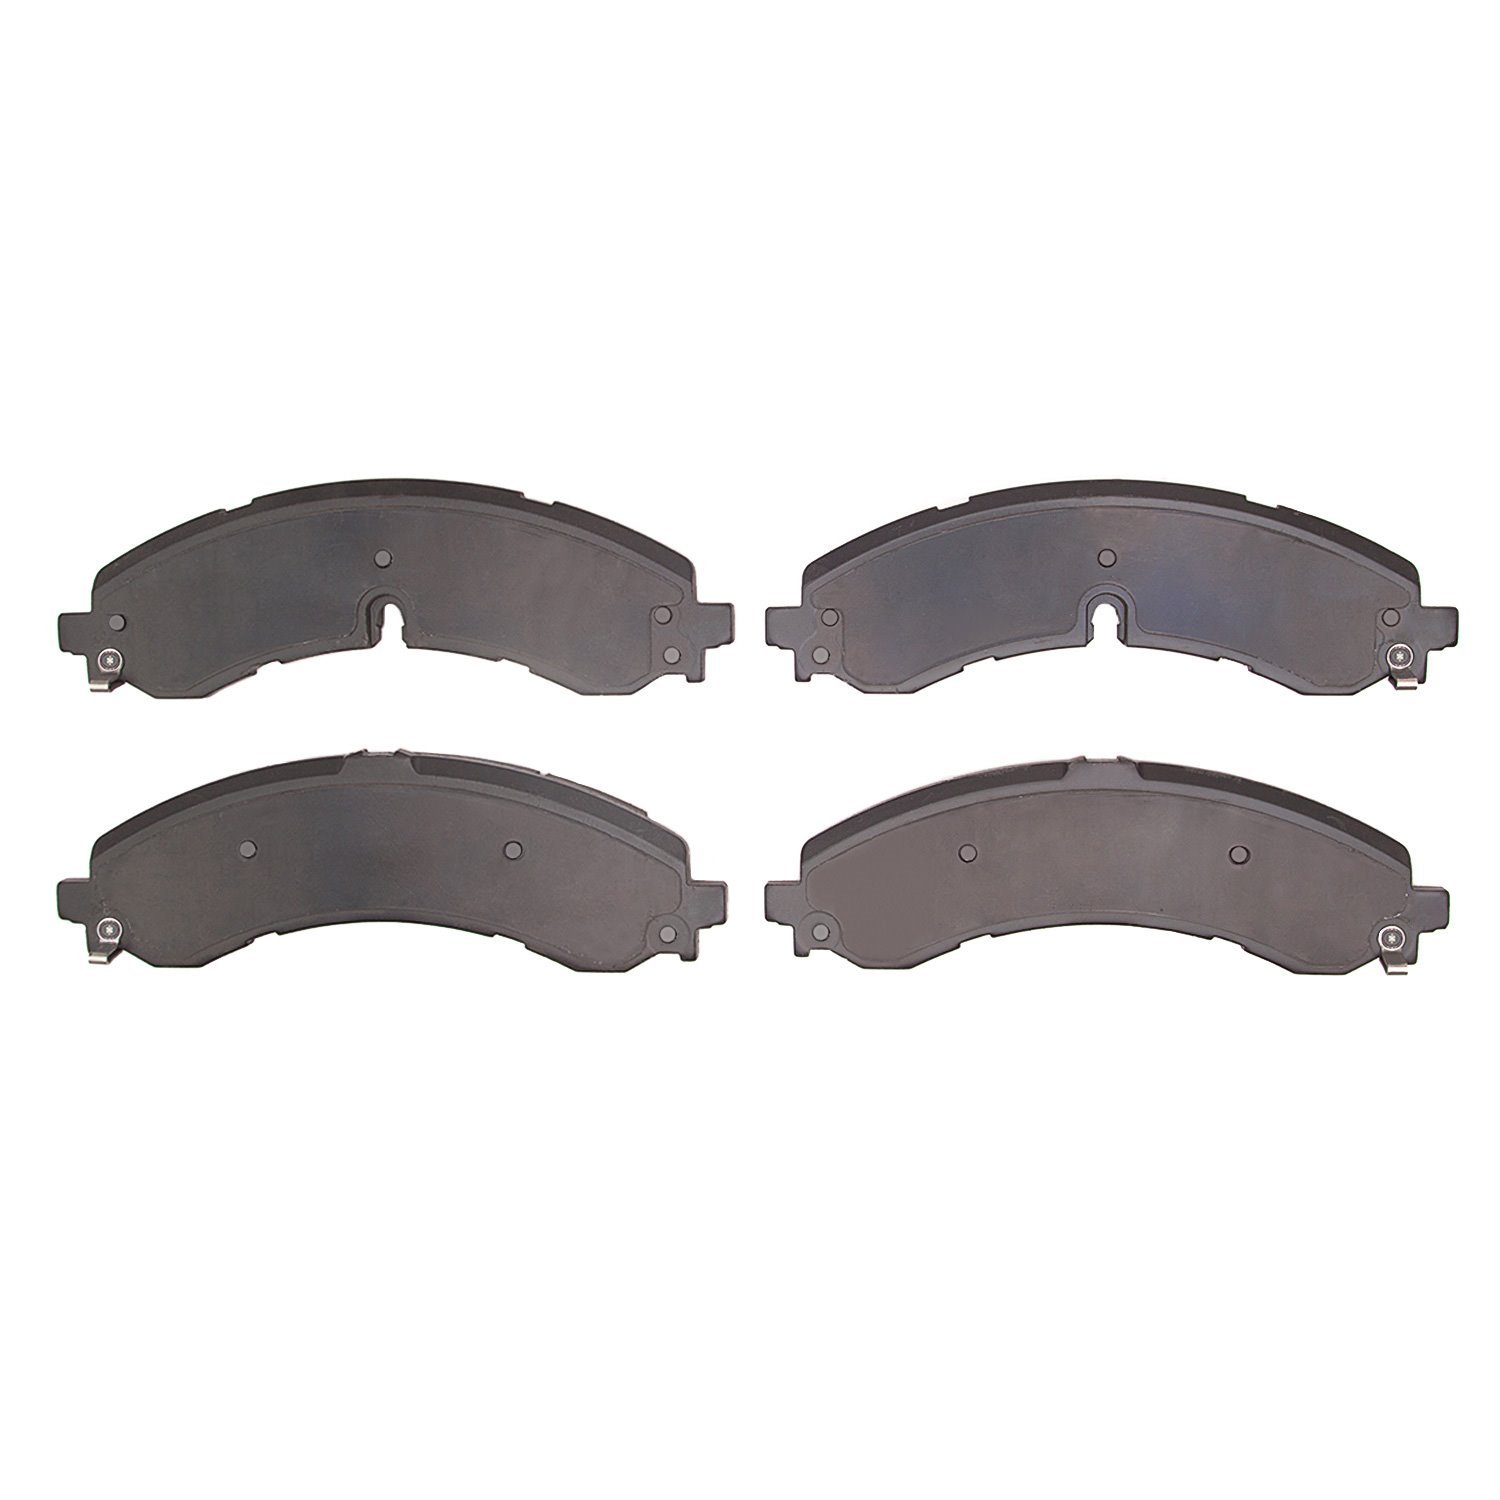 1310-2250-00 3000-Series Ceramic Brake Pads, Fits Select GM, Position: Rear,Front